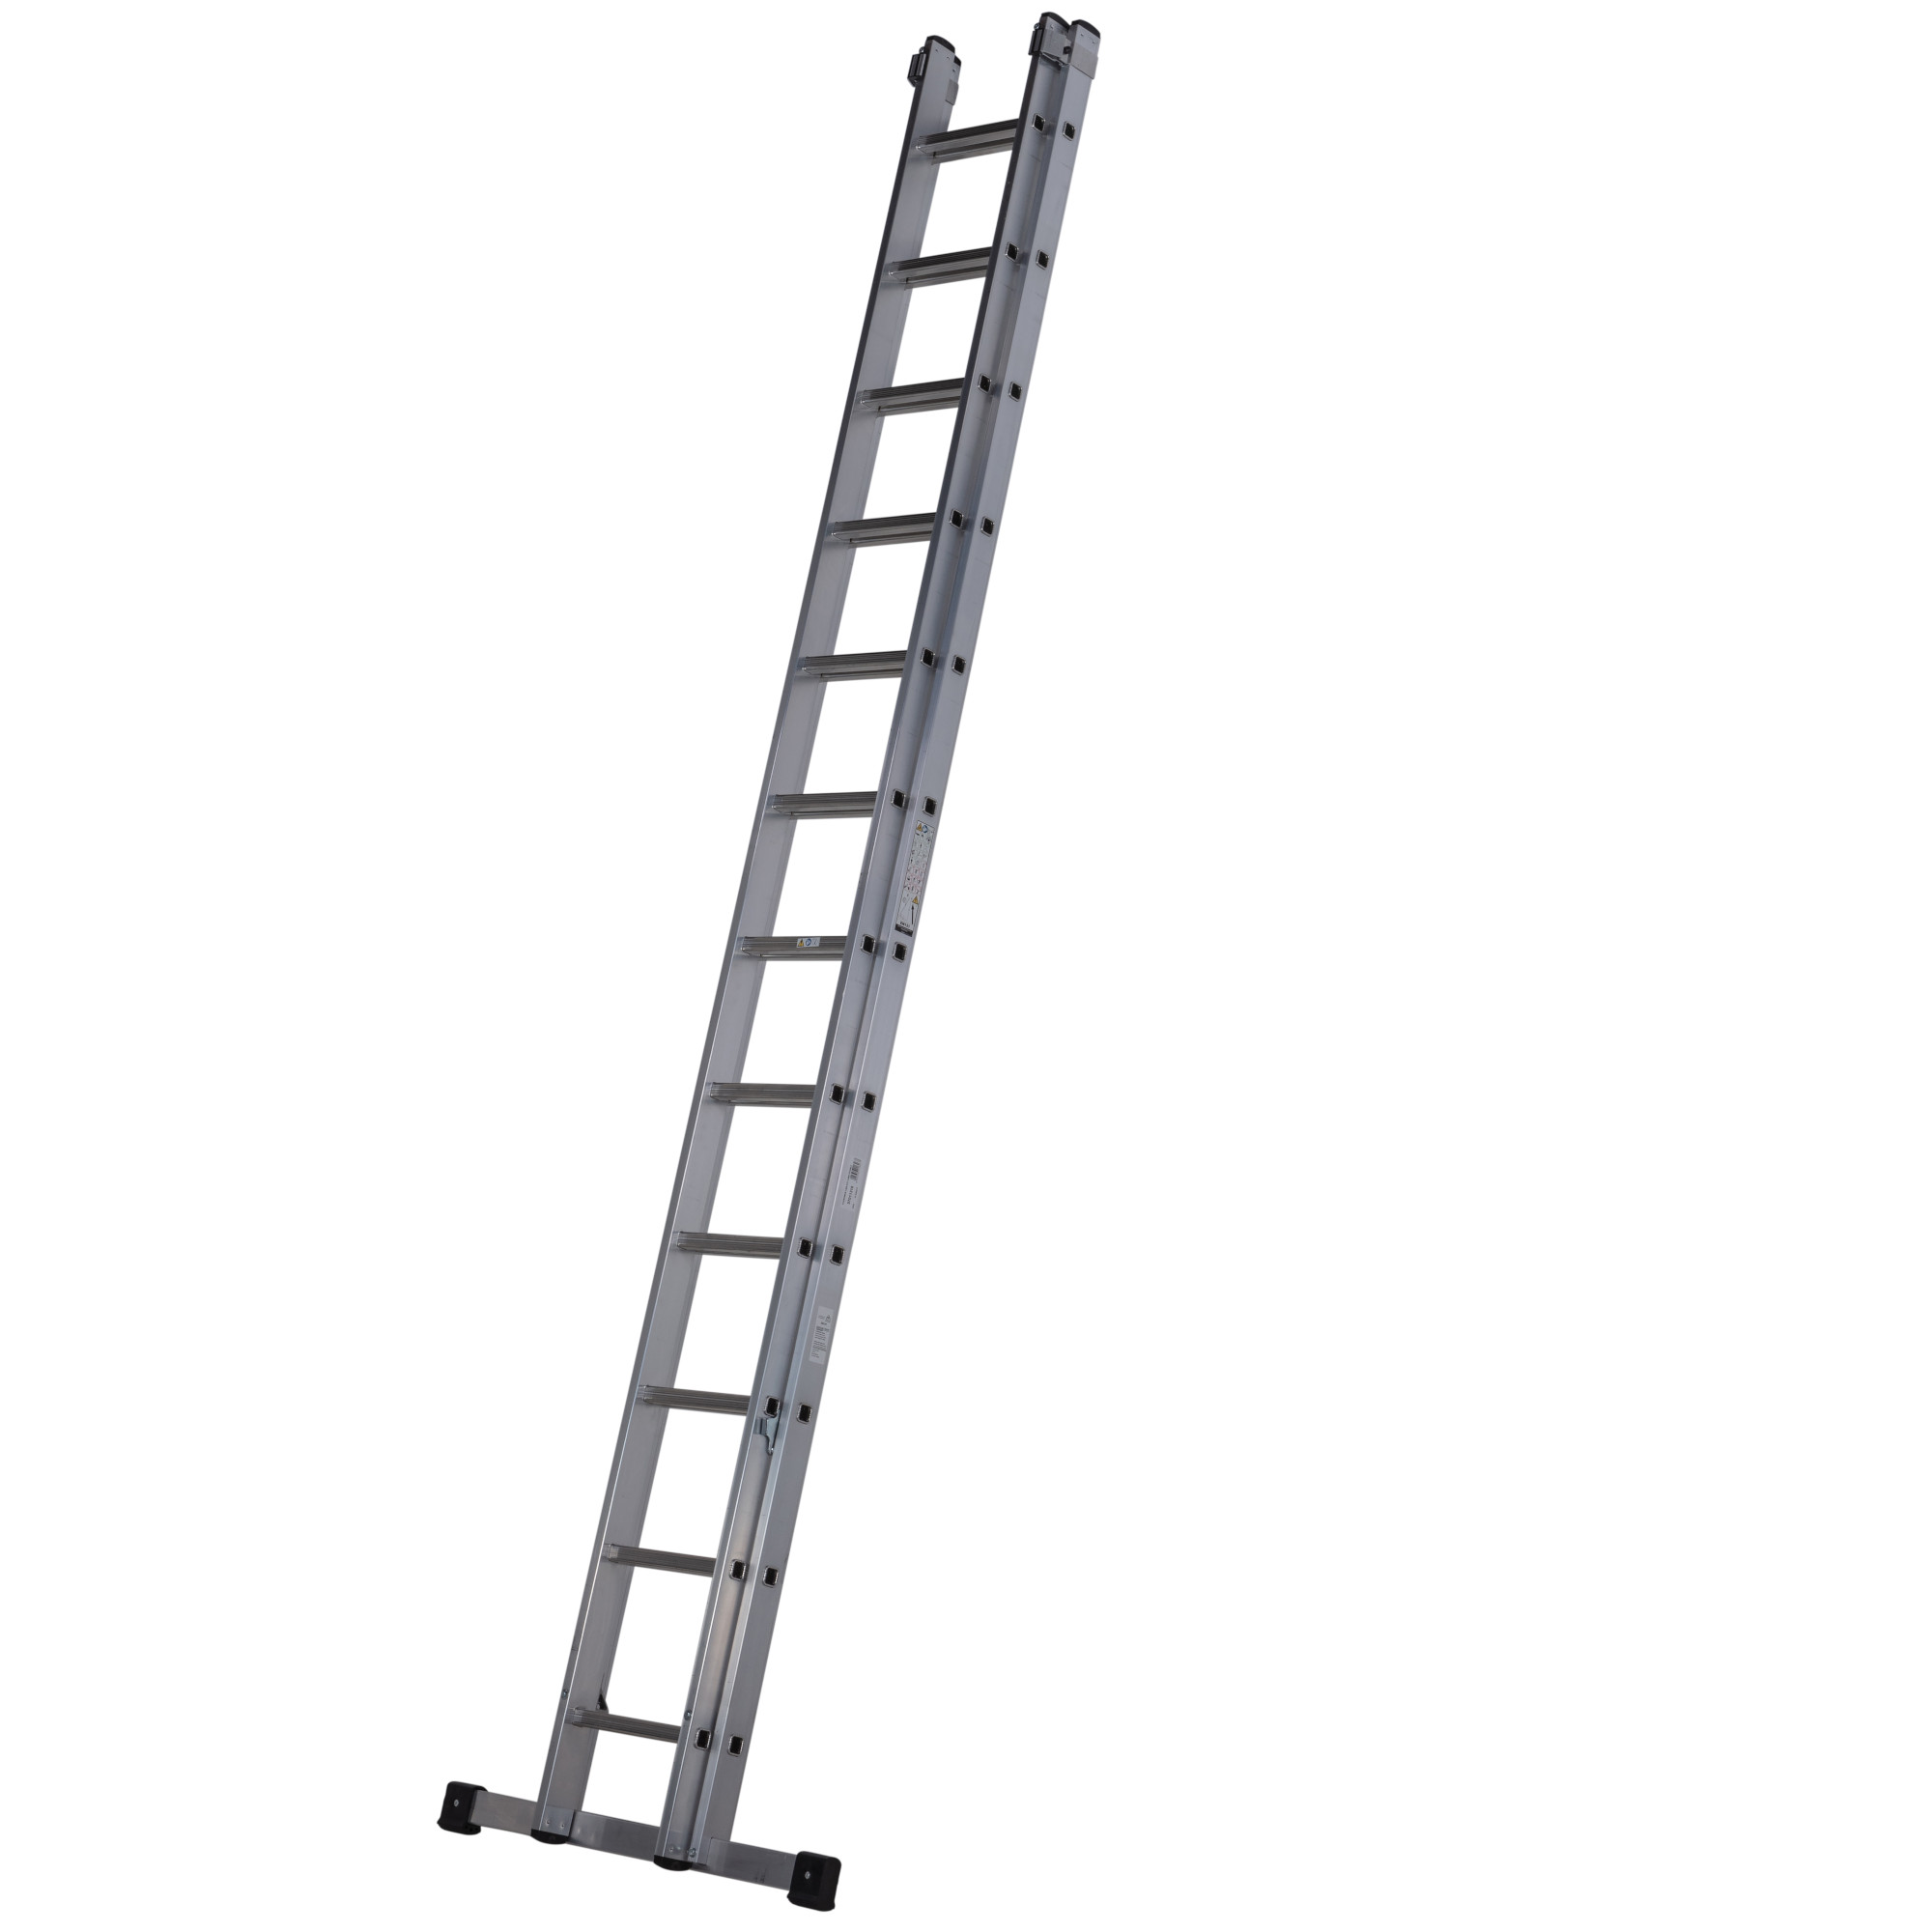 Youngman Trade 200 2 Section Extension Ladder